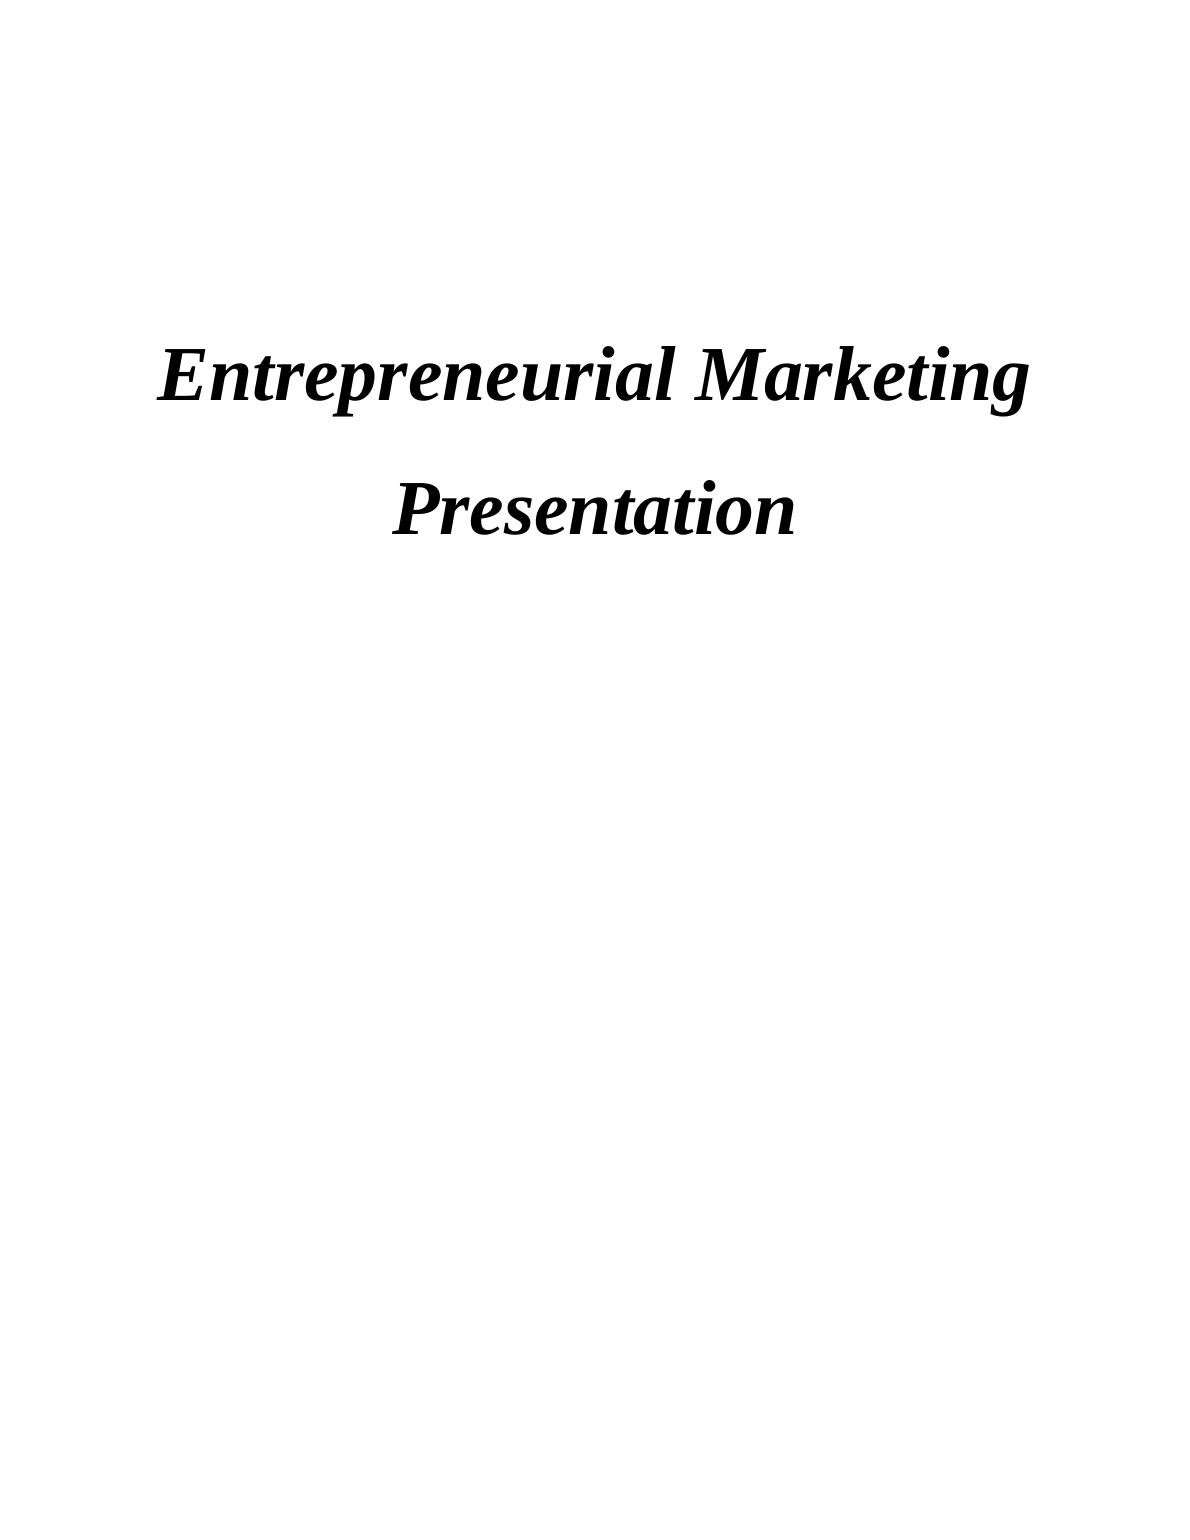 Entrepreneurial Marketing: Word of Mouth, Social Media, Market Innovation, and Market Differentiation Strategy_1